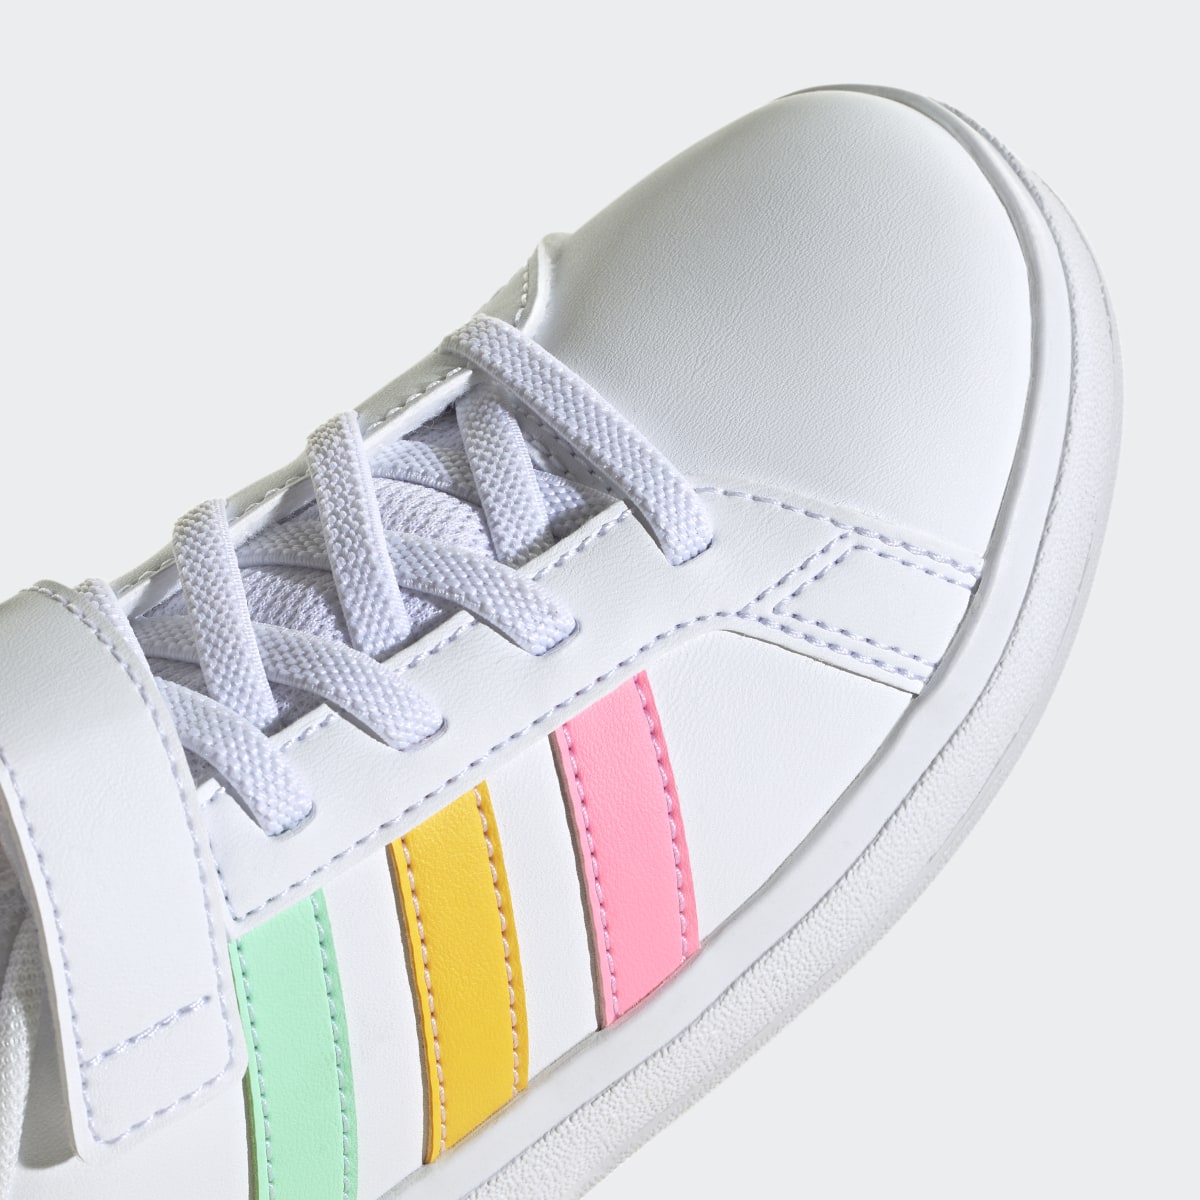 Adidas Grand Court Court Elastic Lace and Top Strap Schuh. 10